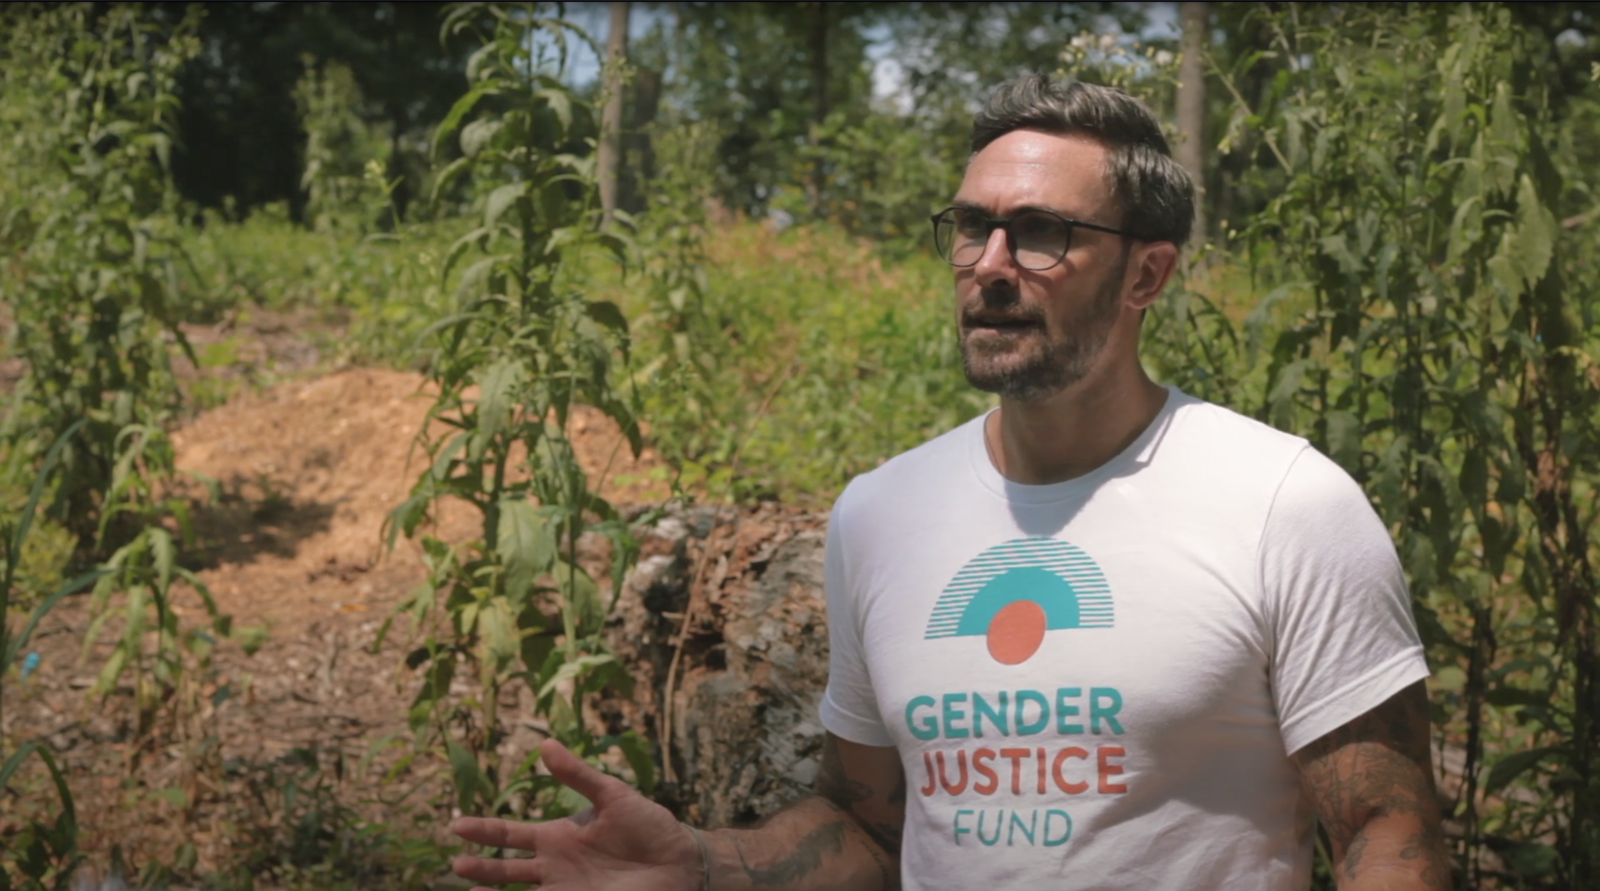 man with Gender Justice Fund tshirt with greenery in the background for 100 People Listening: Practicing Awareness When Listening project